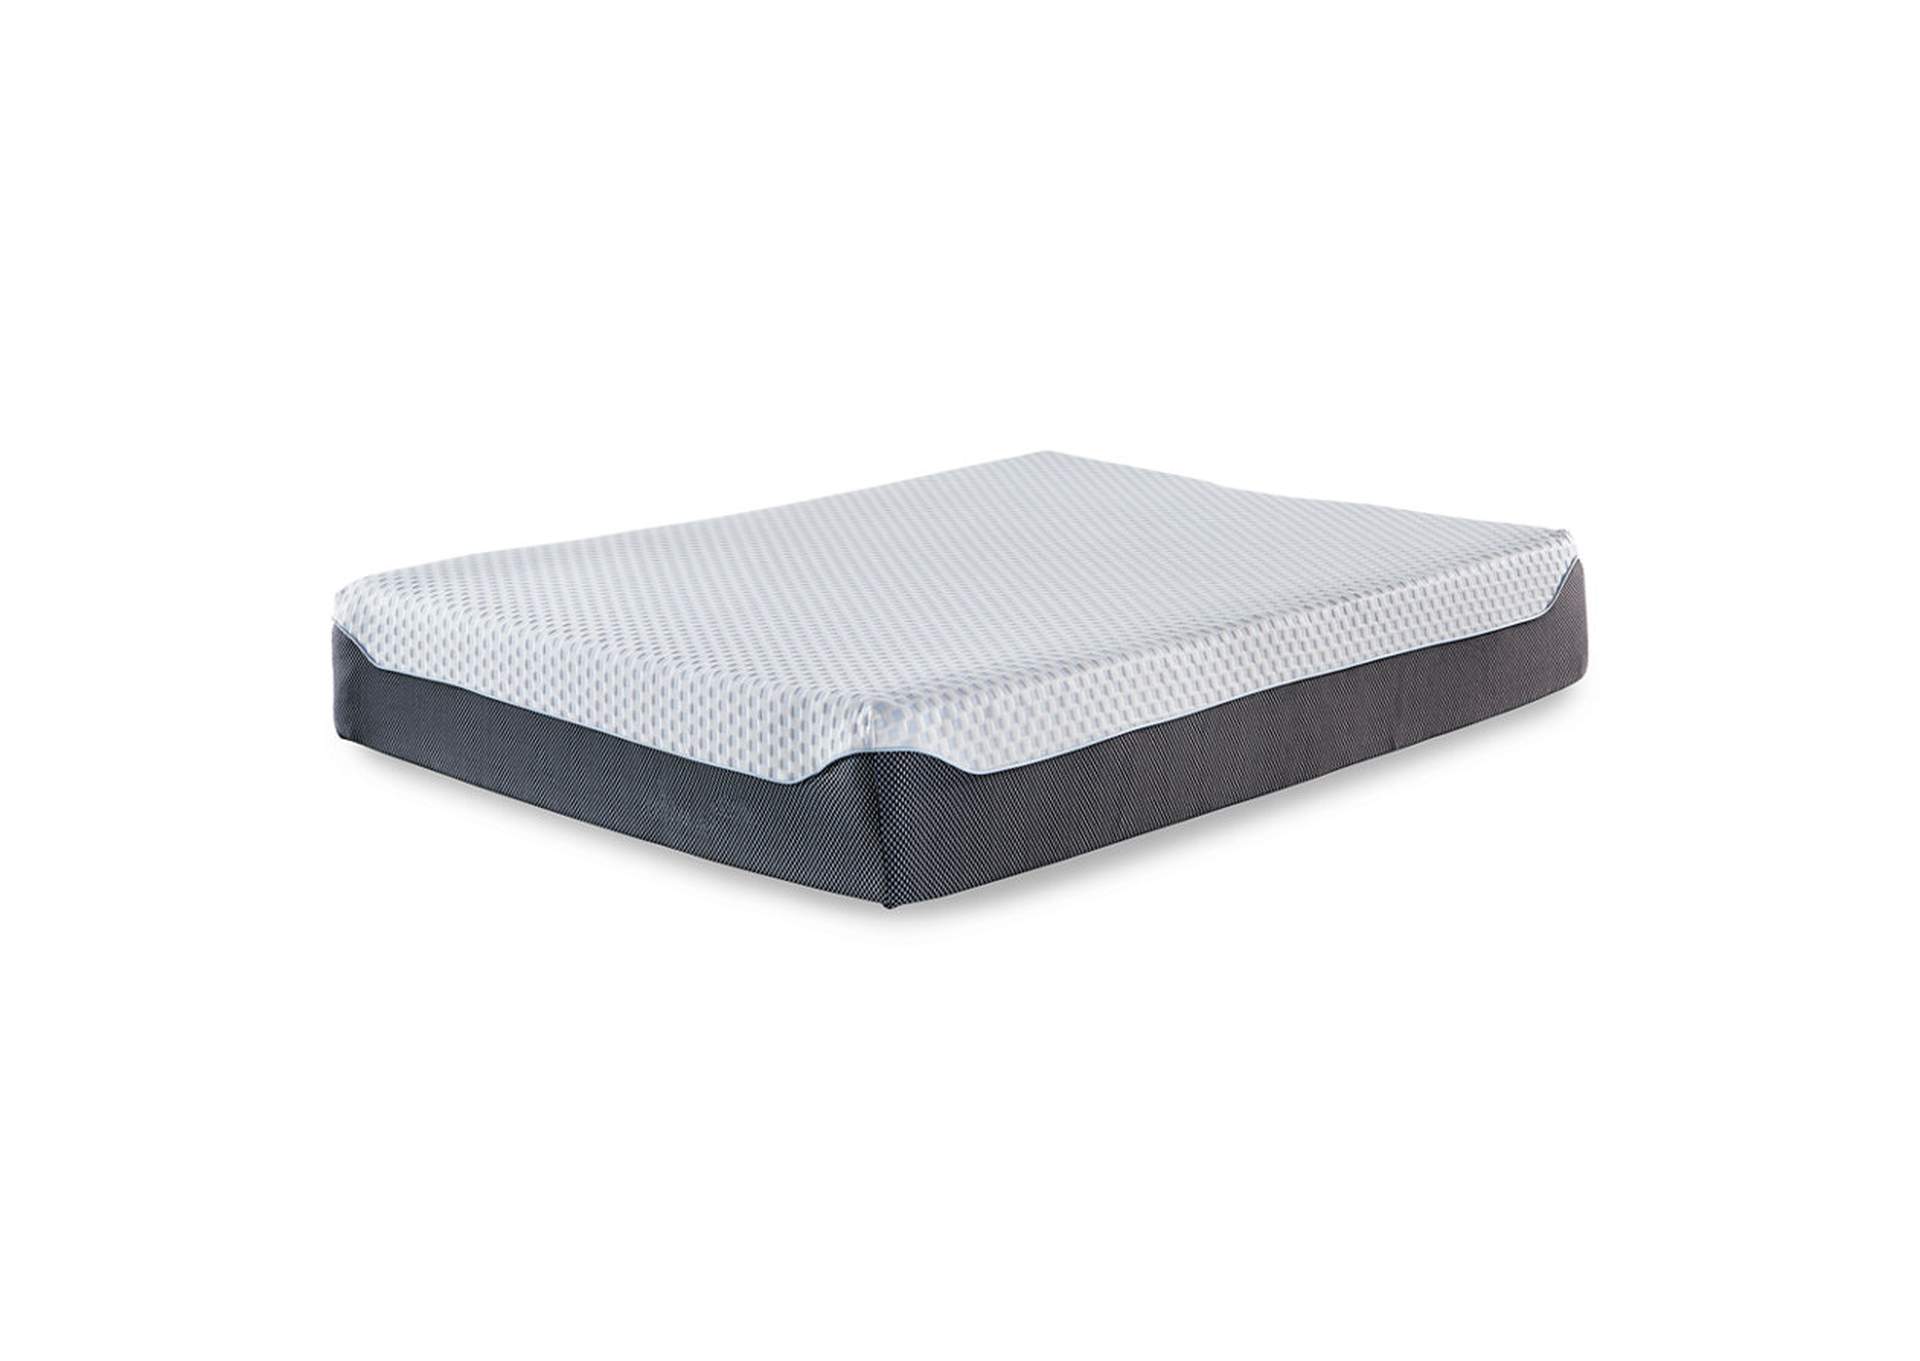 12 Inch Chime Elite California King Memory Foam Mattress in a box,Direct To Consumer Express